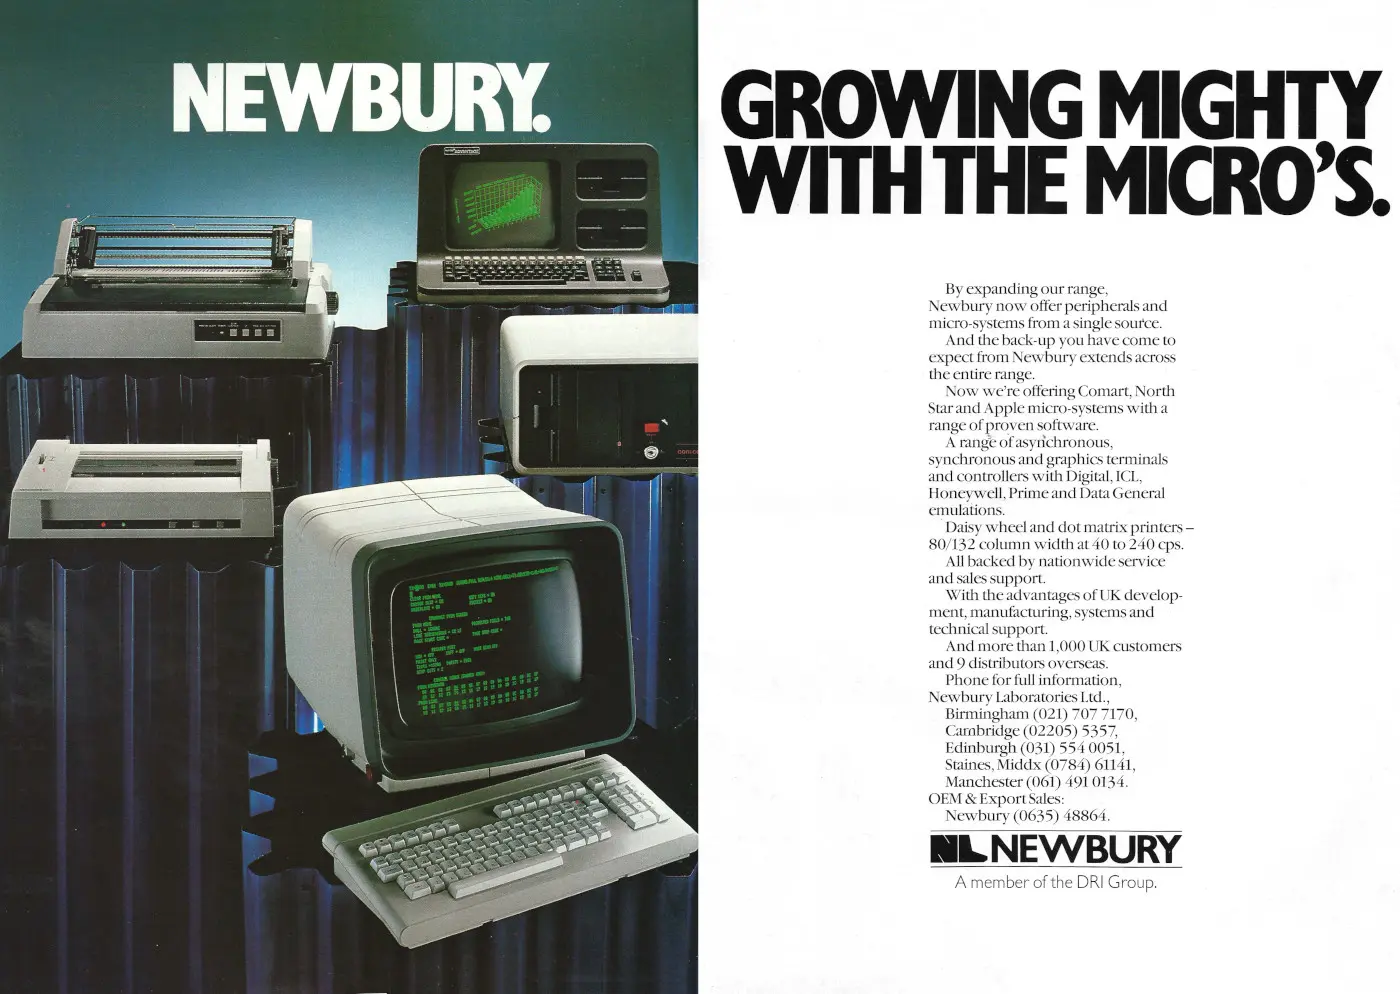 Newbury Laboratories Advert: Newbury. Growing mighty with the micros, from Micro Decisions, May 1982